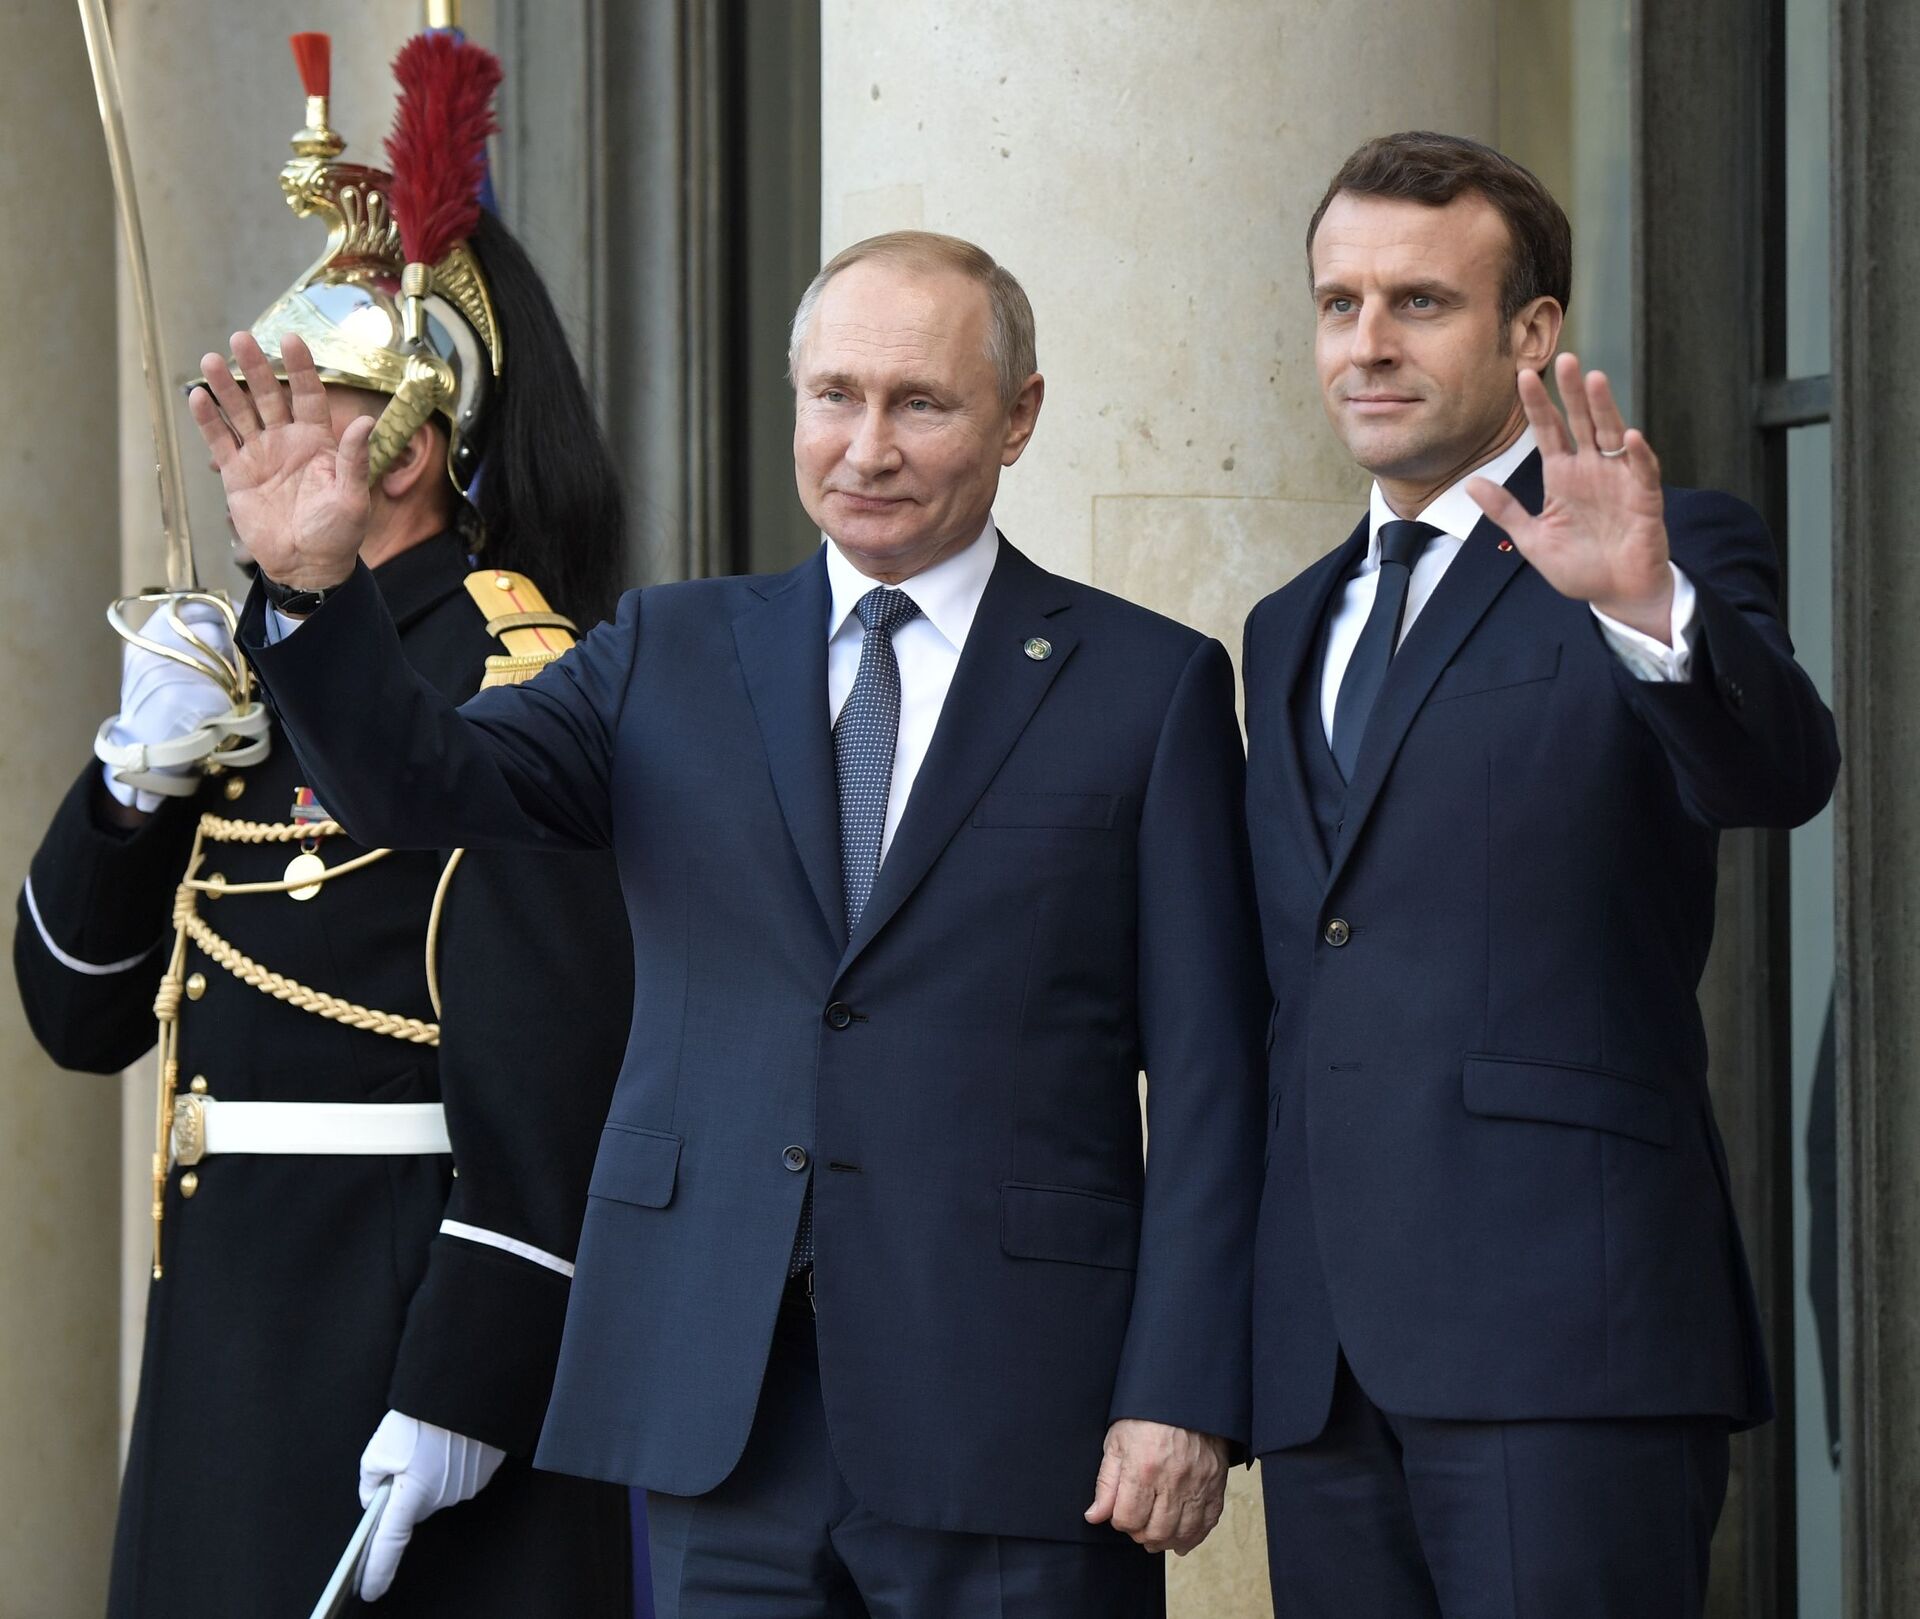 Russian President Vladimir Putin and French counterpart Emmanuel Macron during the official ceremony at the Elysee Palace on 9 December 2019 - Sputnik International, 1920, 09.02.2022